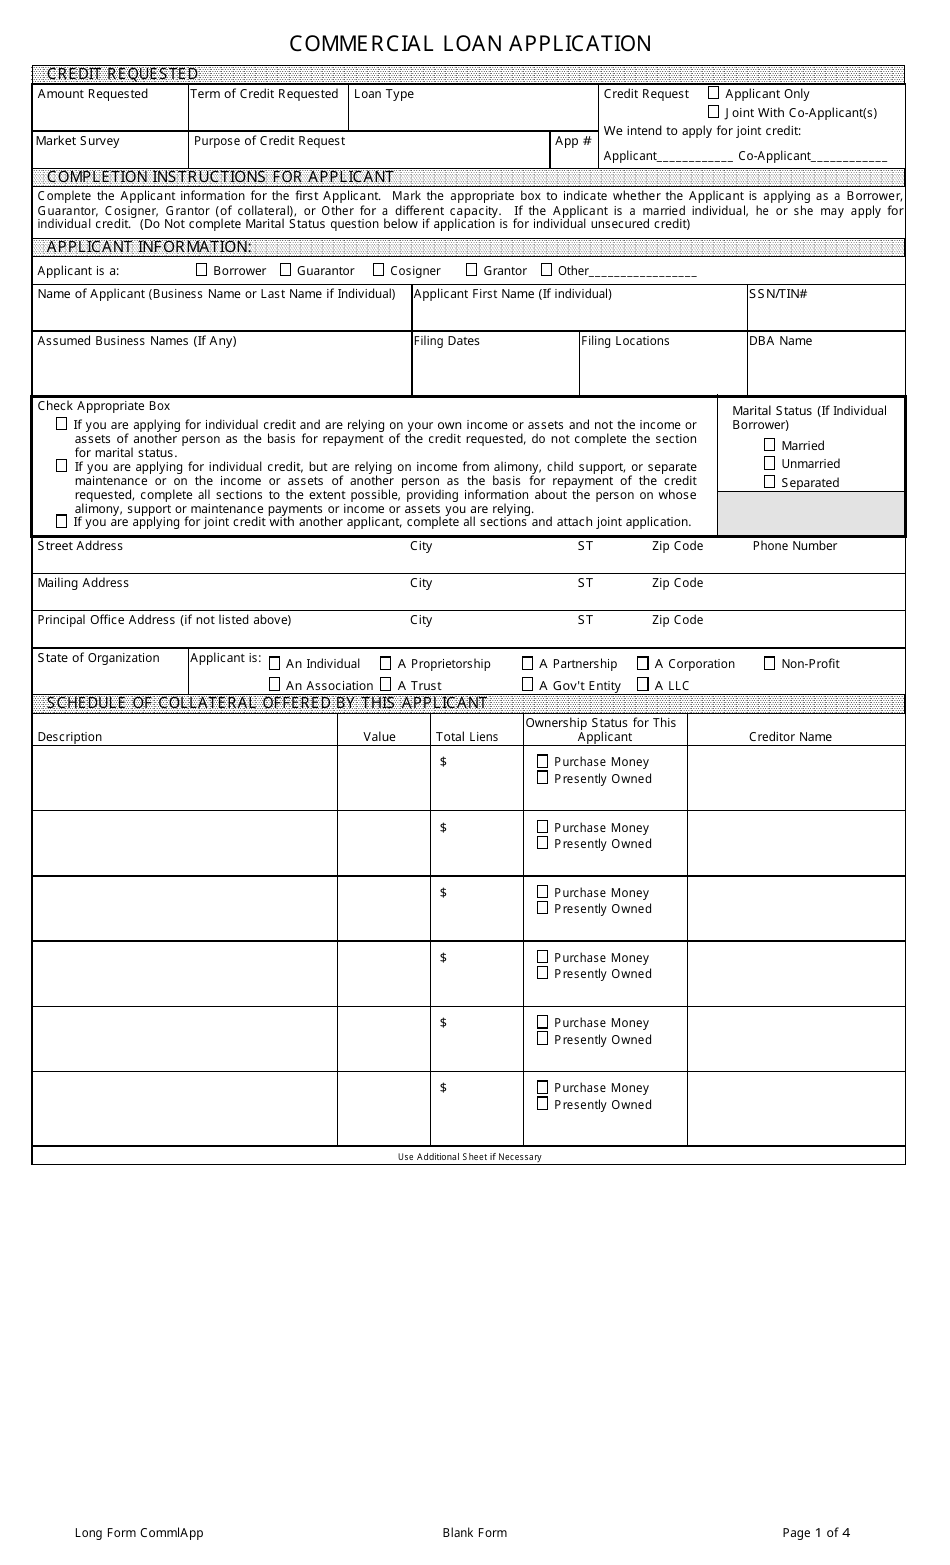 Commercial Loan Application Form Fill Out, Sign Online and Download